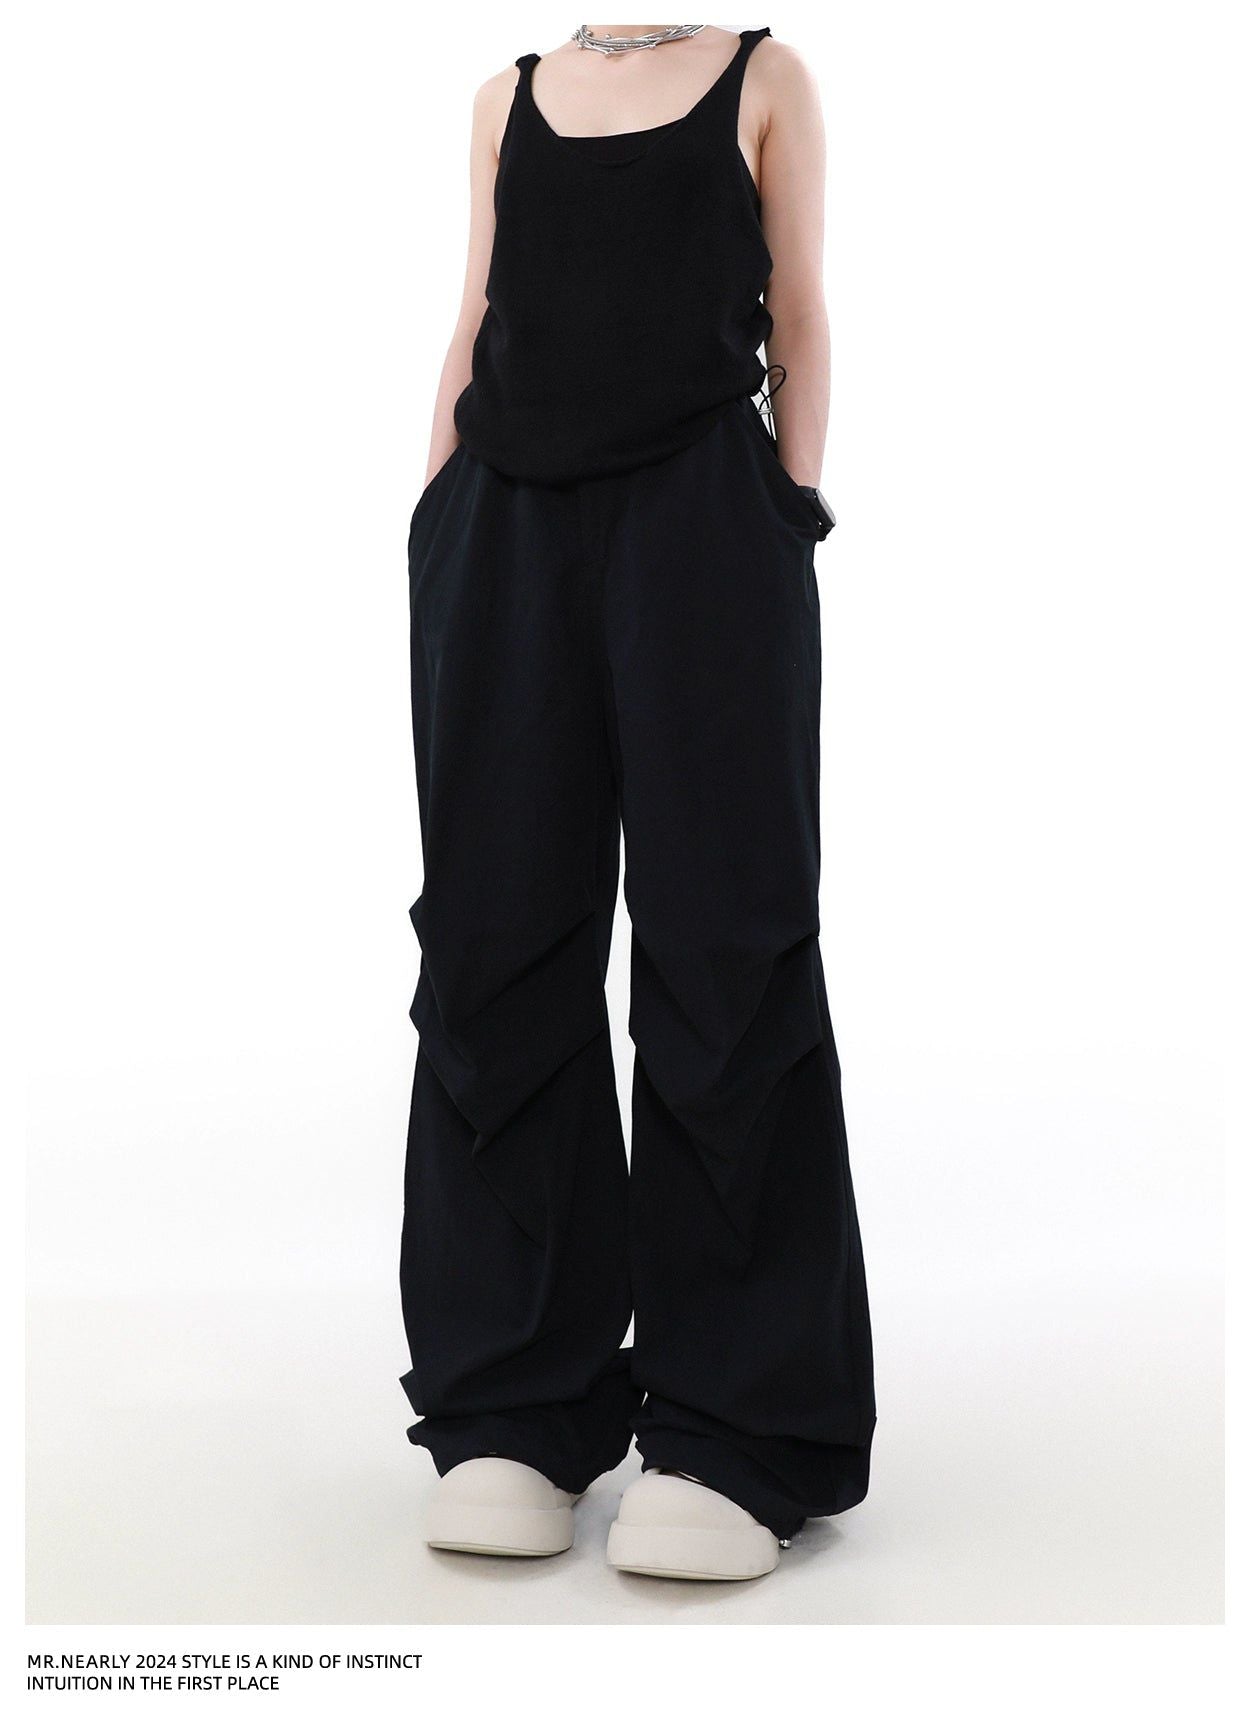 Slant Pocket Pleated Parachute Pants Korean Street Fashion Pants By Mr Nearly Shop Online at OH Vault